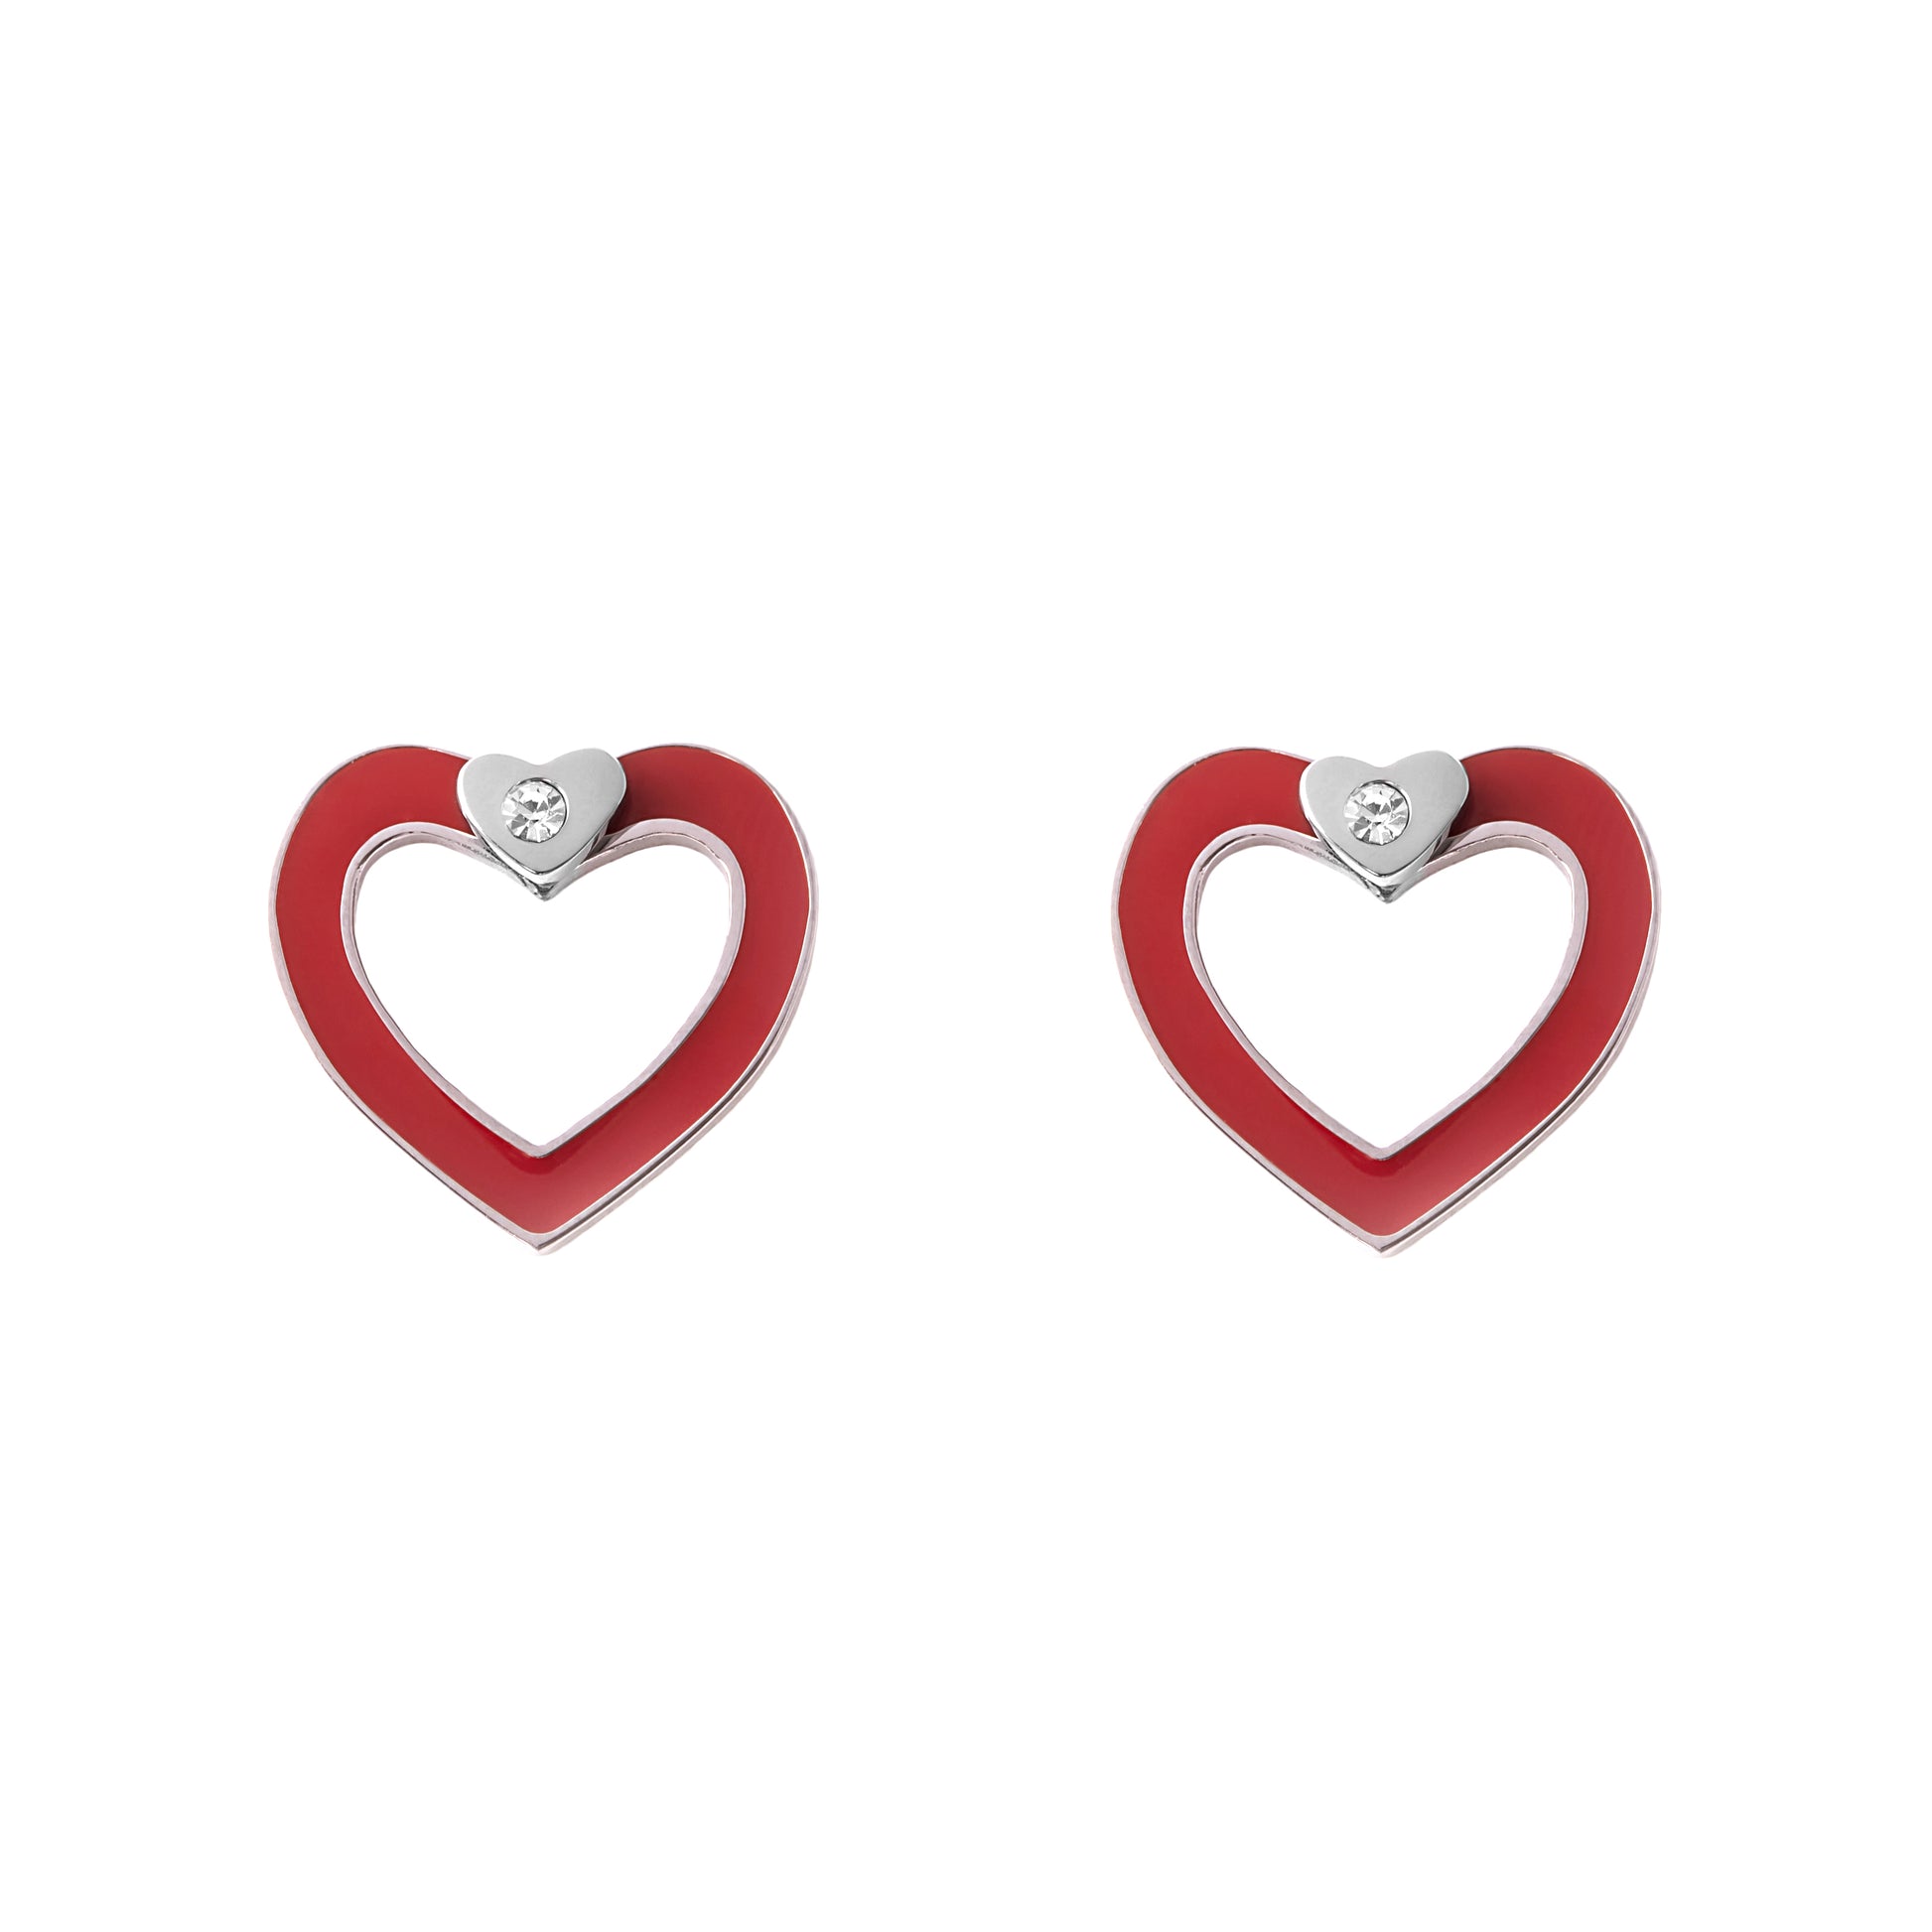 Sparkly Red Open Heart Earrings for Women - Perfect Valentine's Day or Date Night Jewelry Gift